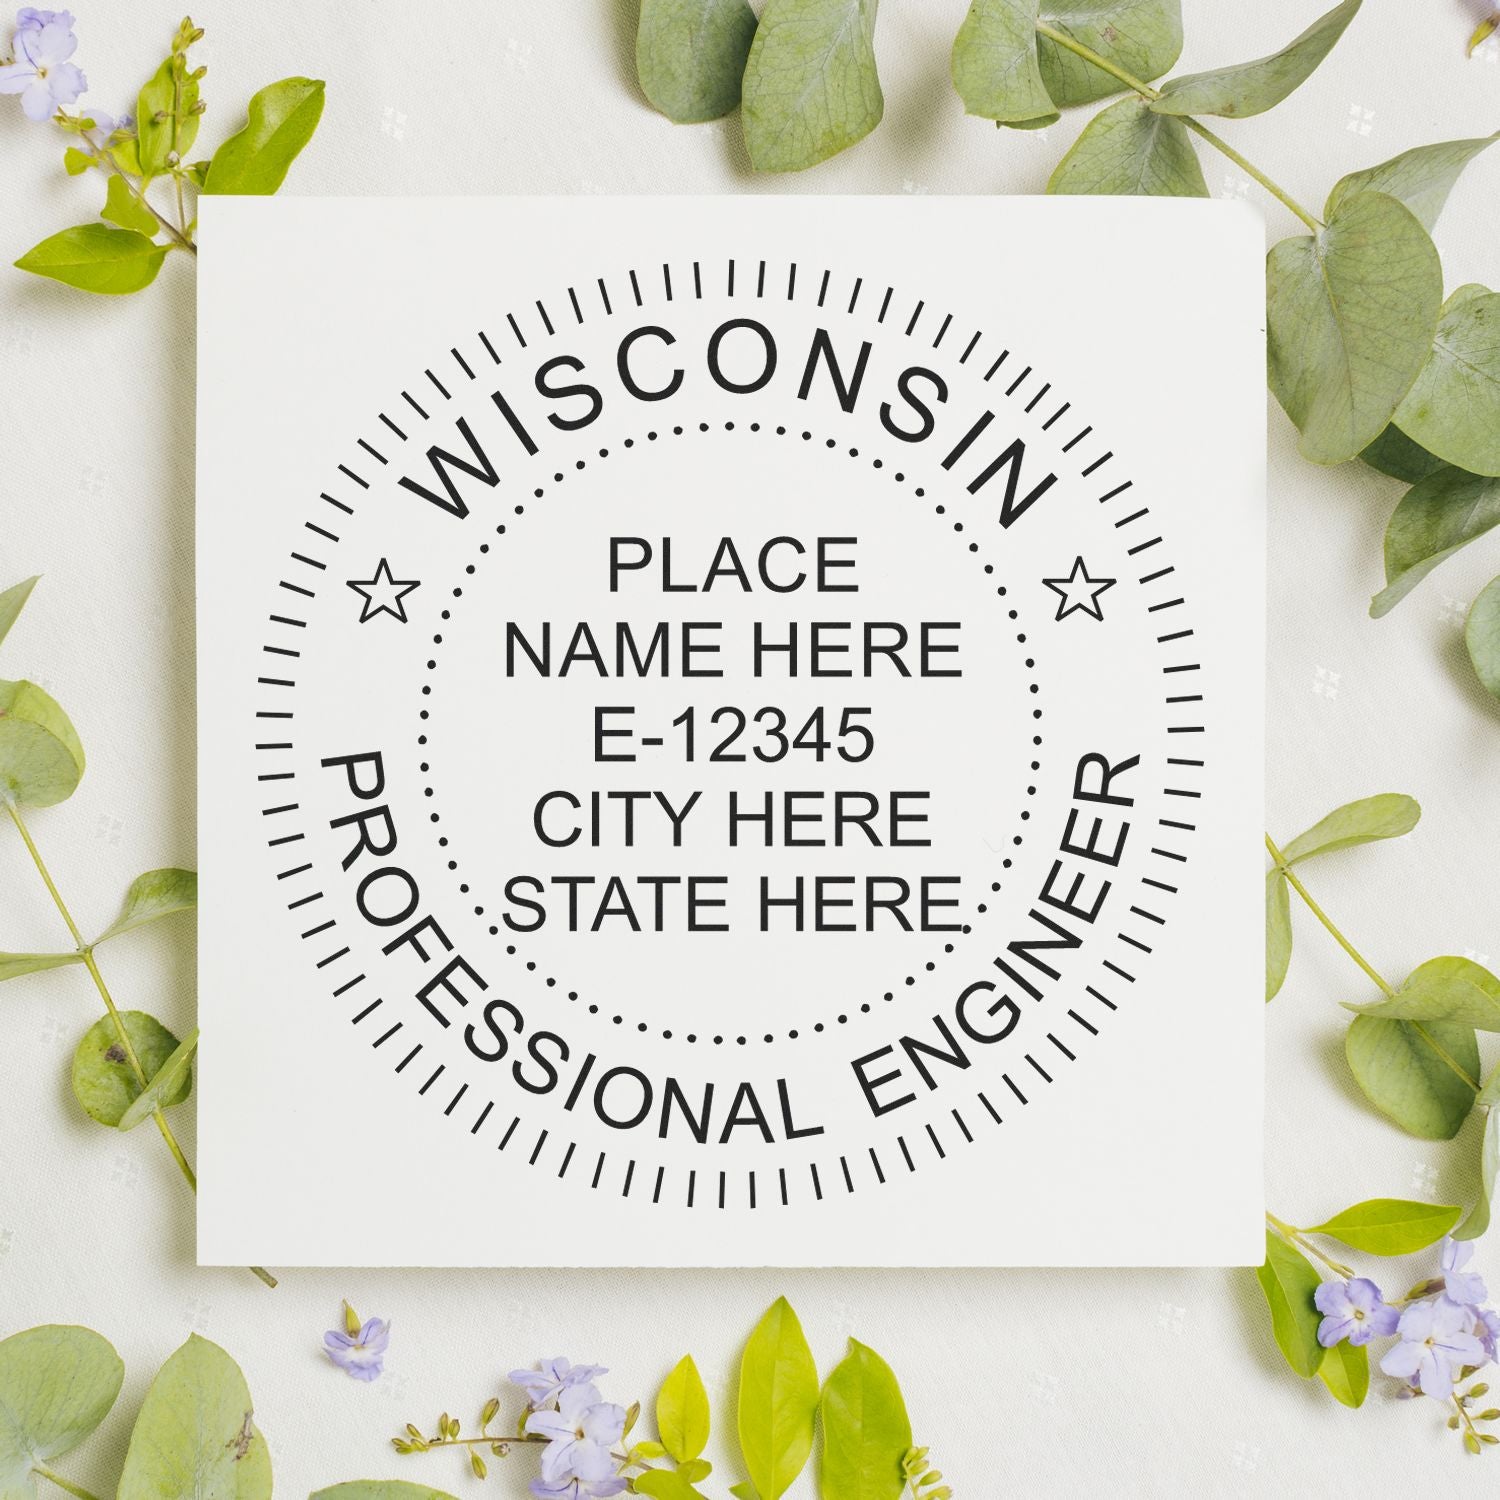 This paper is stamped with a sample imprint of the Wisconsin Professional Engineer Seal Stamp, signifying its quality and reliability.